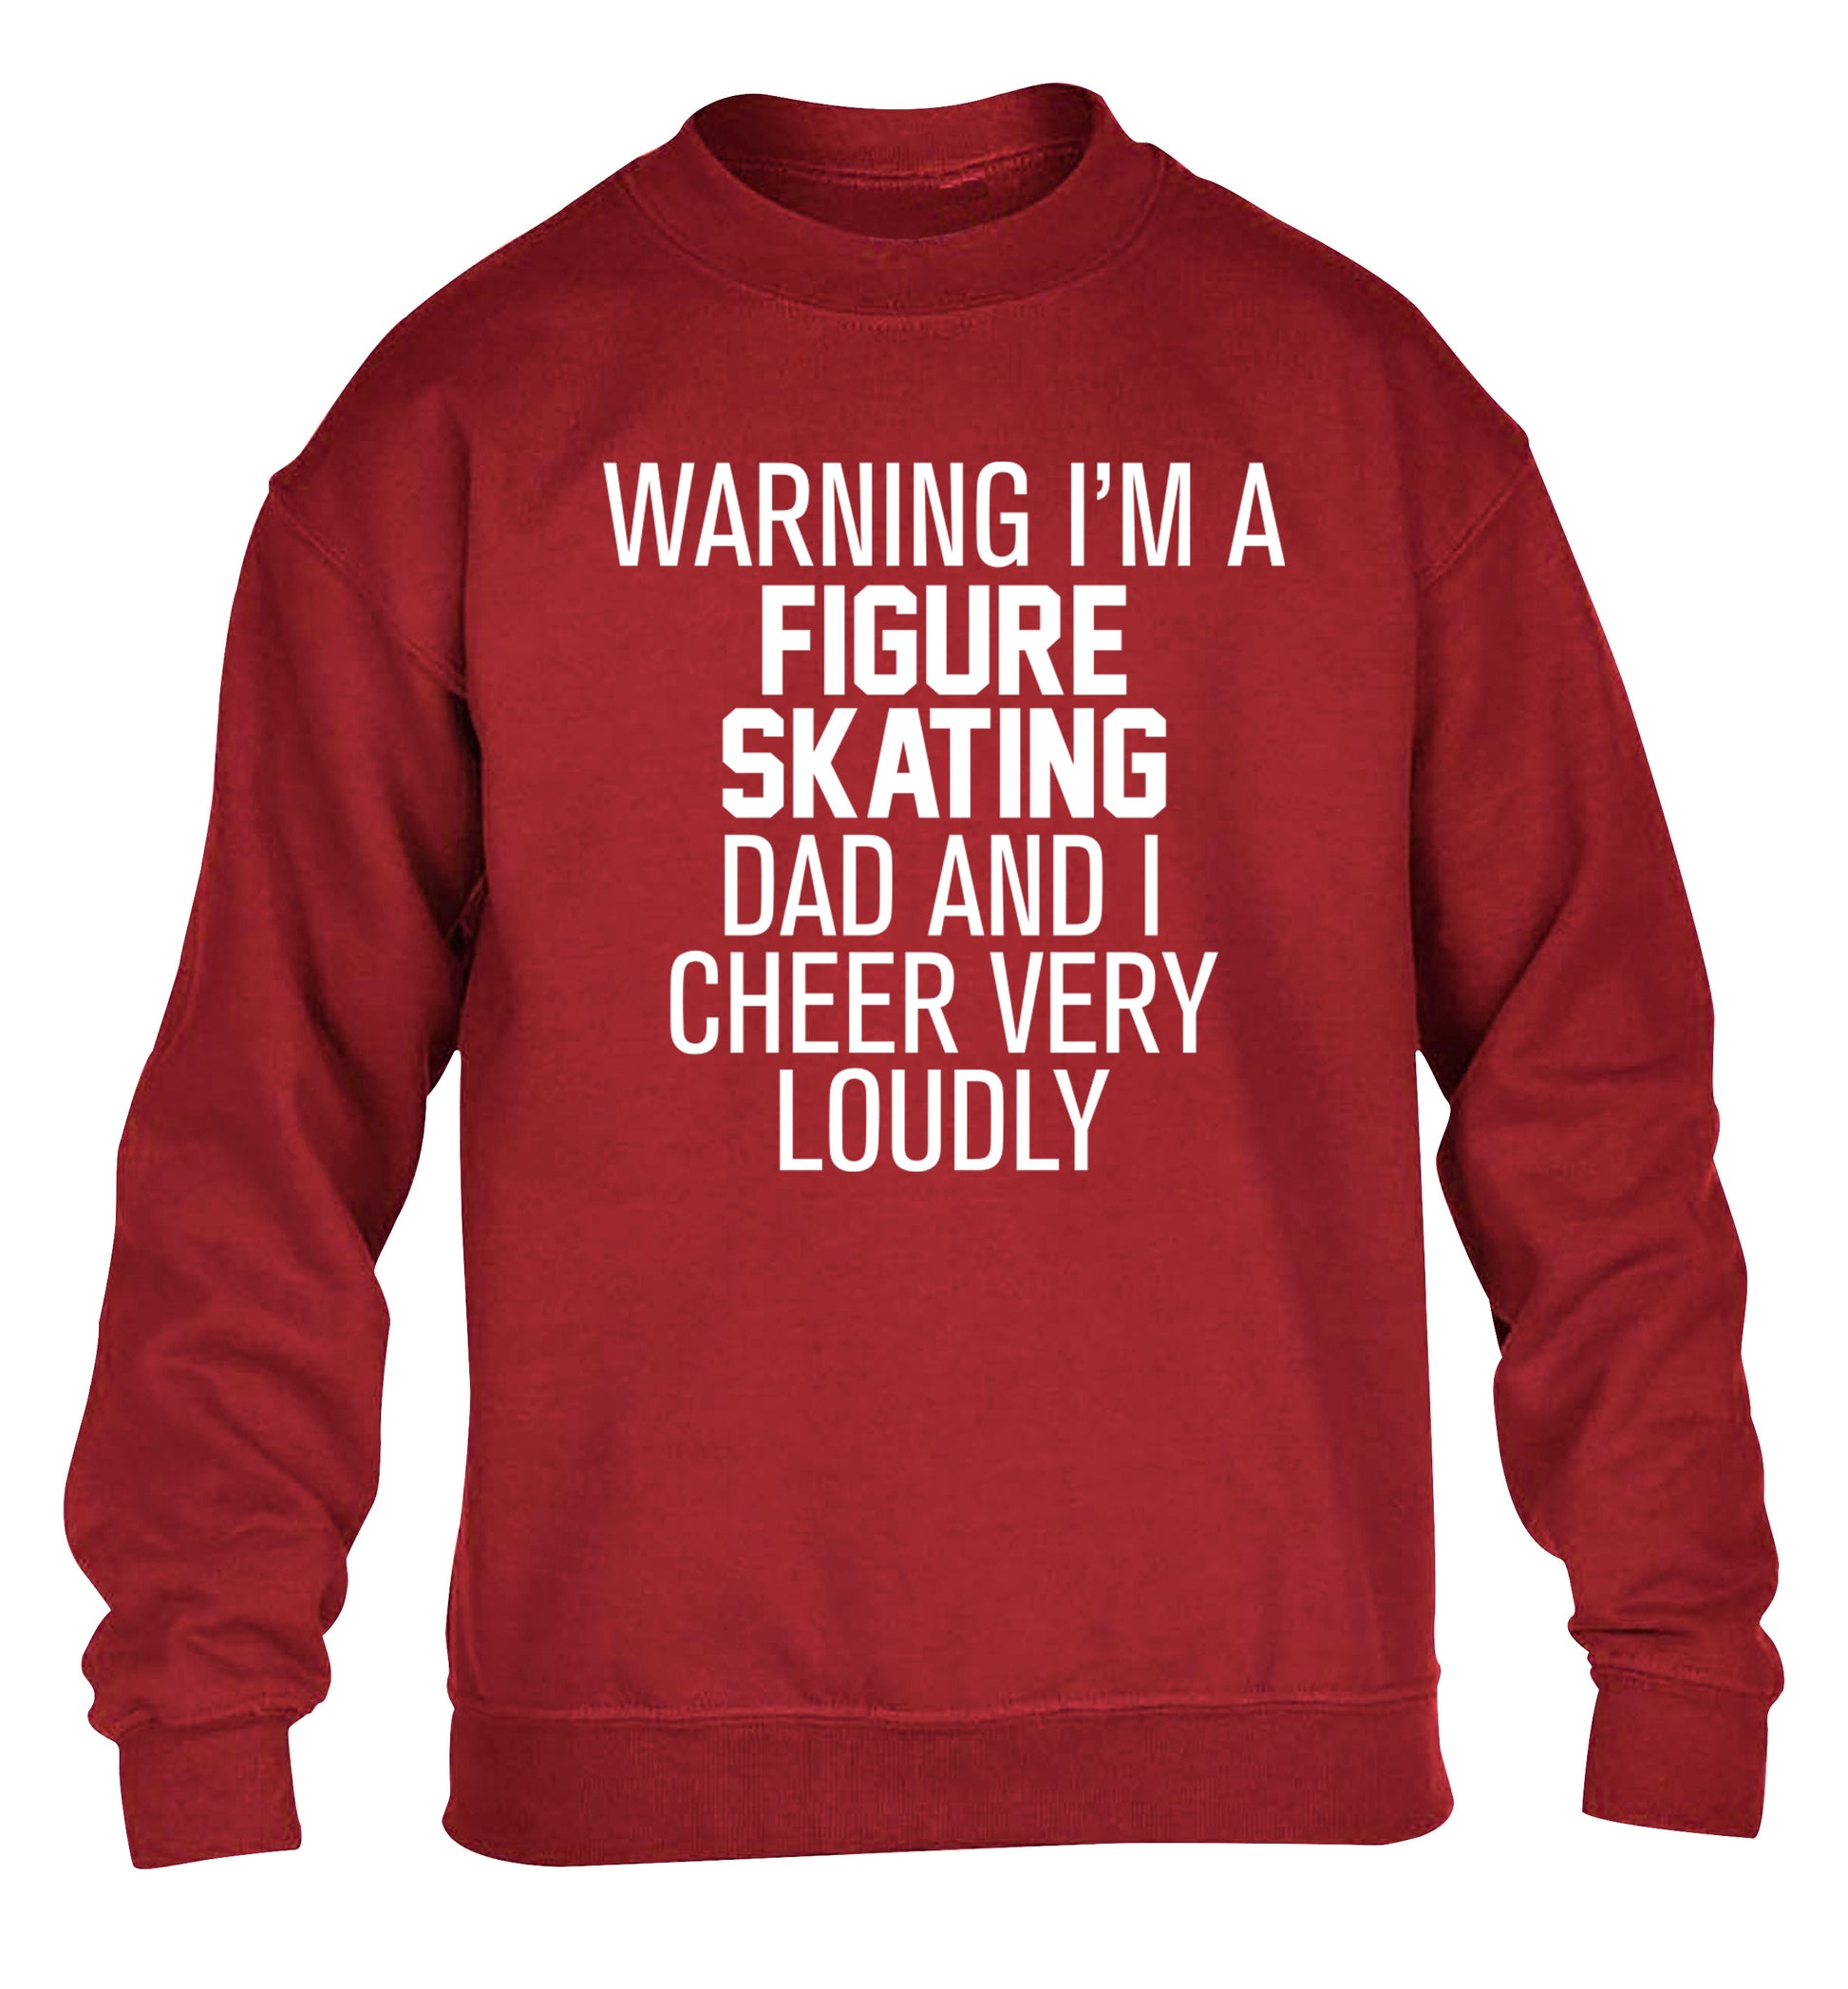 Warning I'm a figure skating dad and I cheer very loudly children's grey sweater 12-14 Years